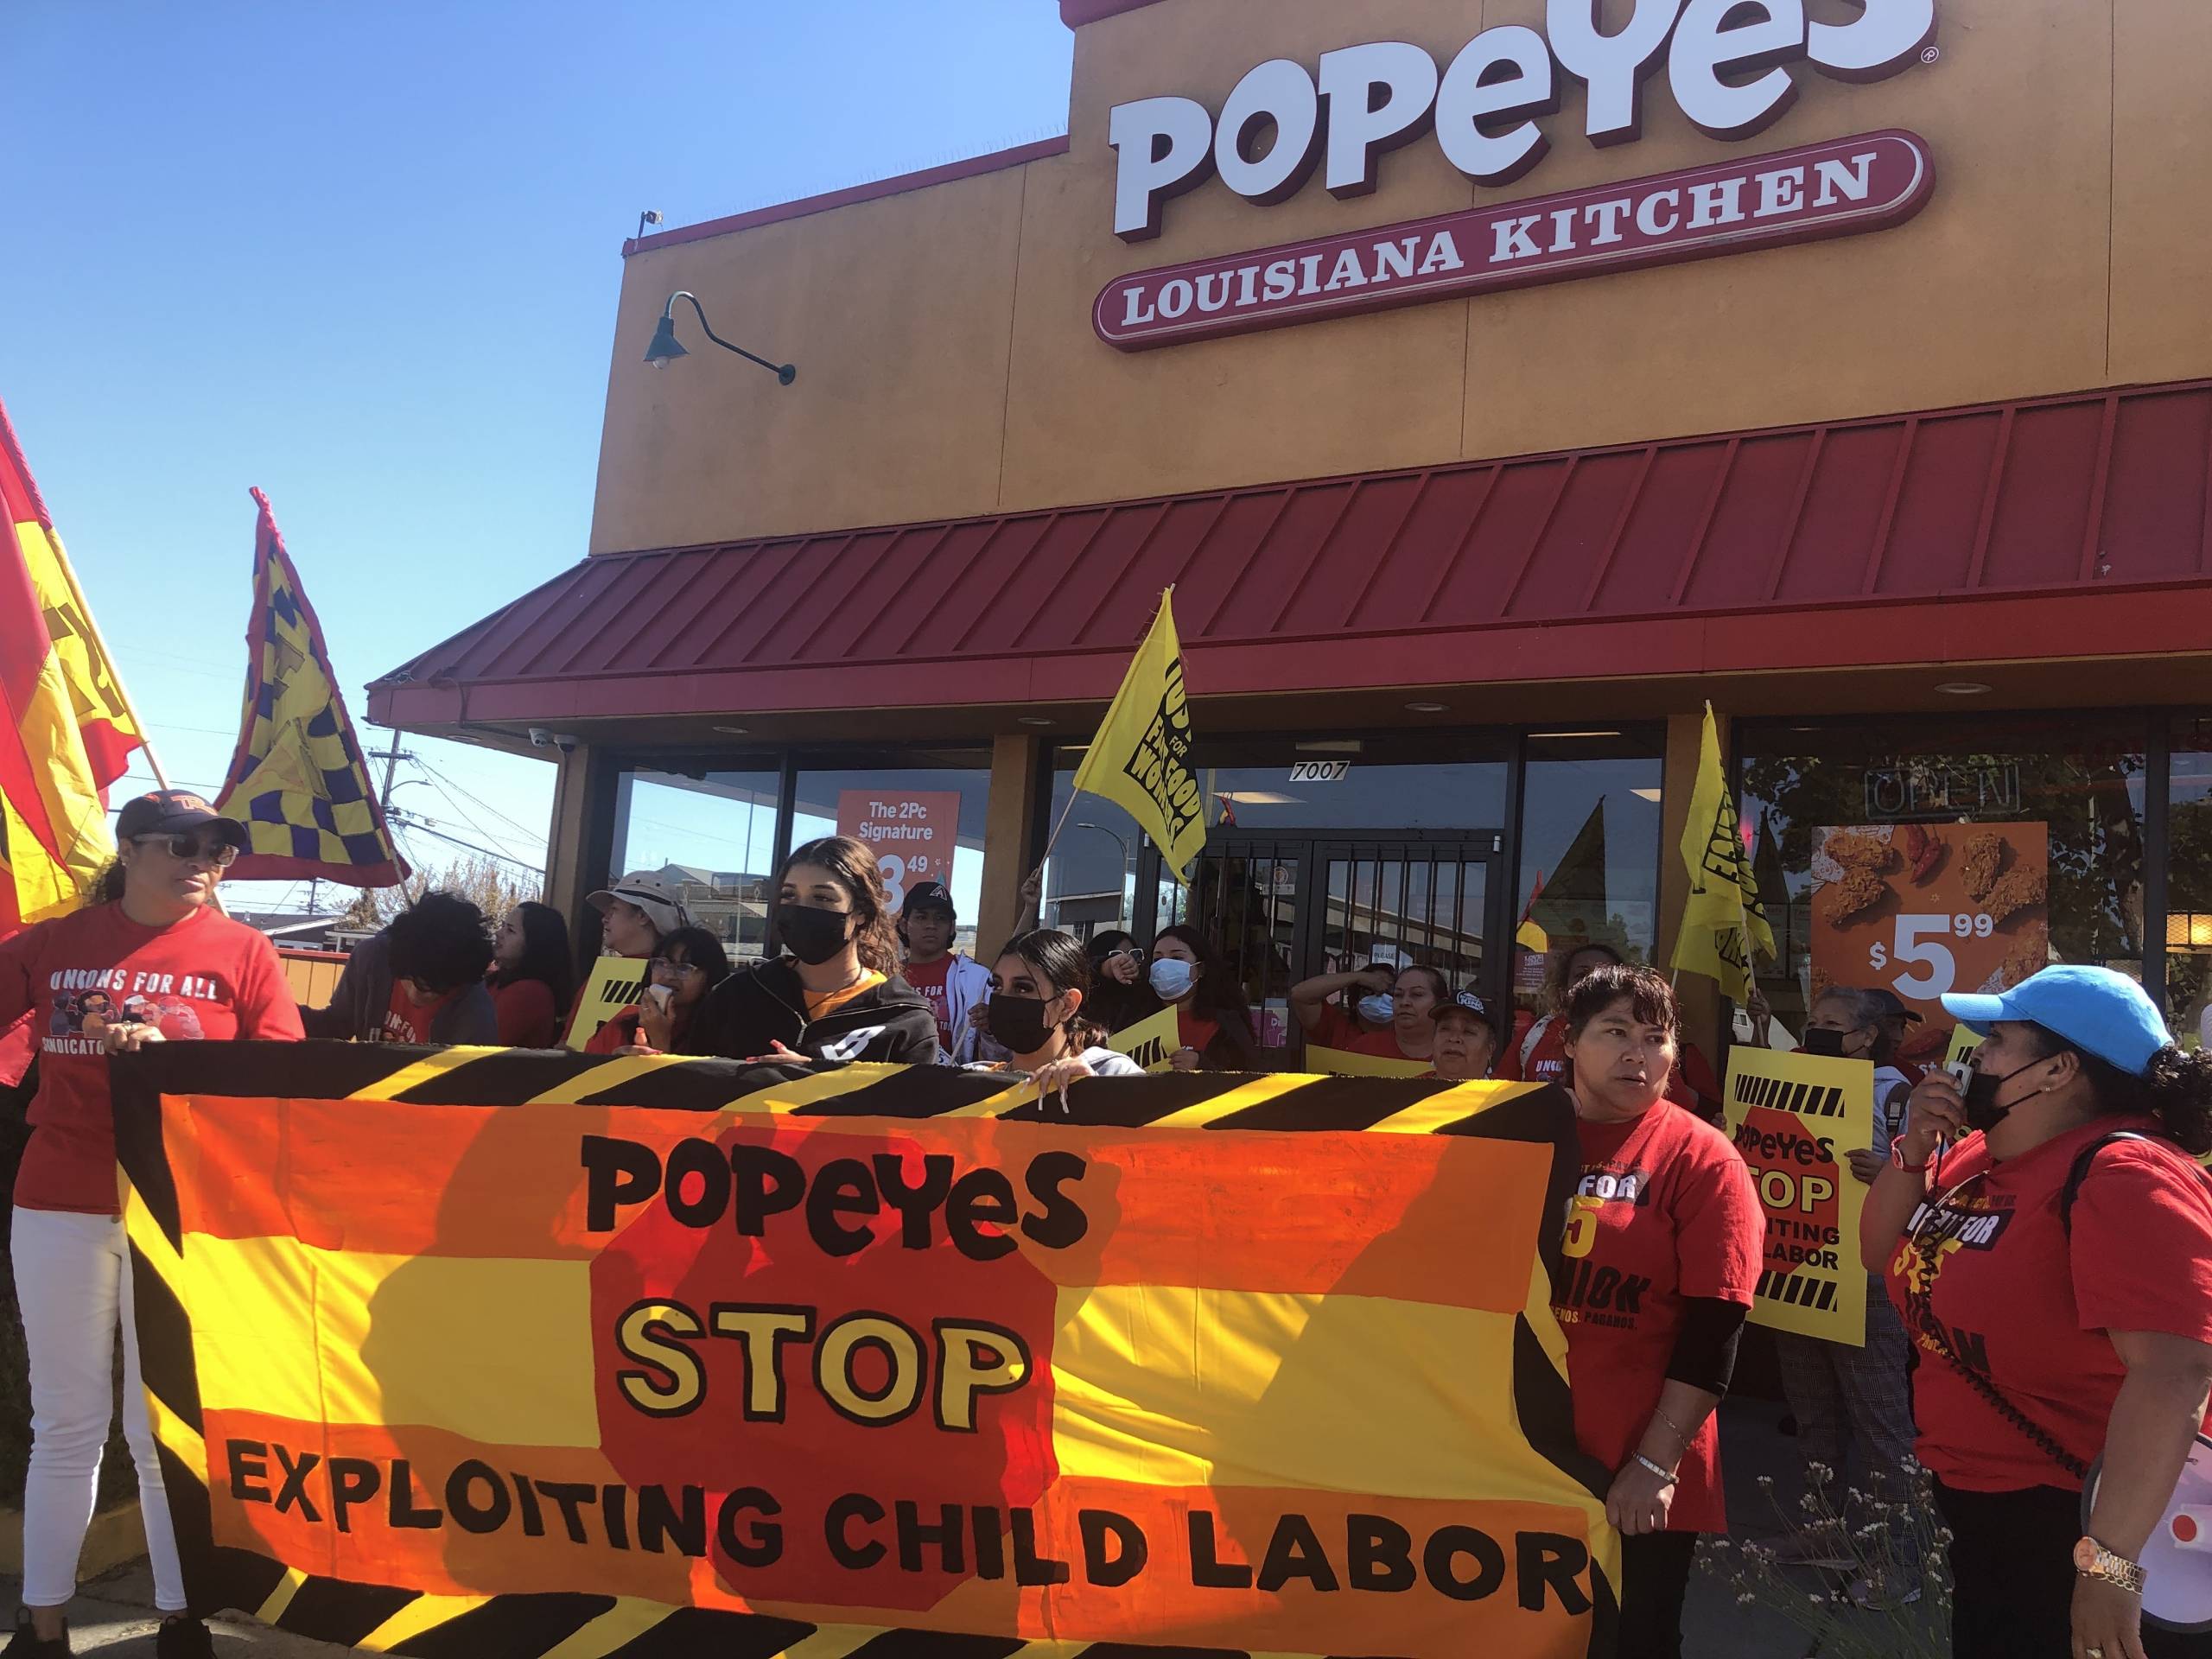 Protestors outside of a Popeyes restaurant.